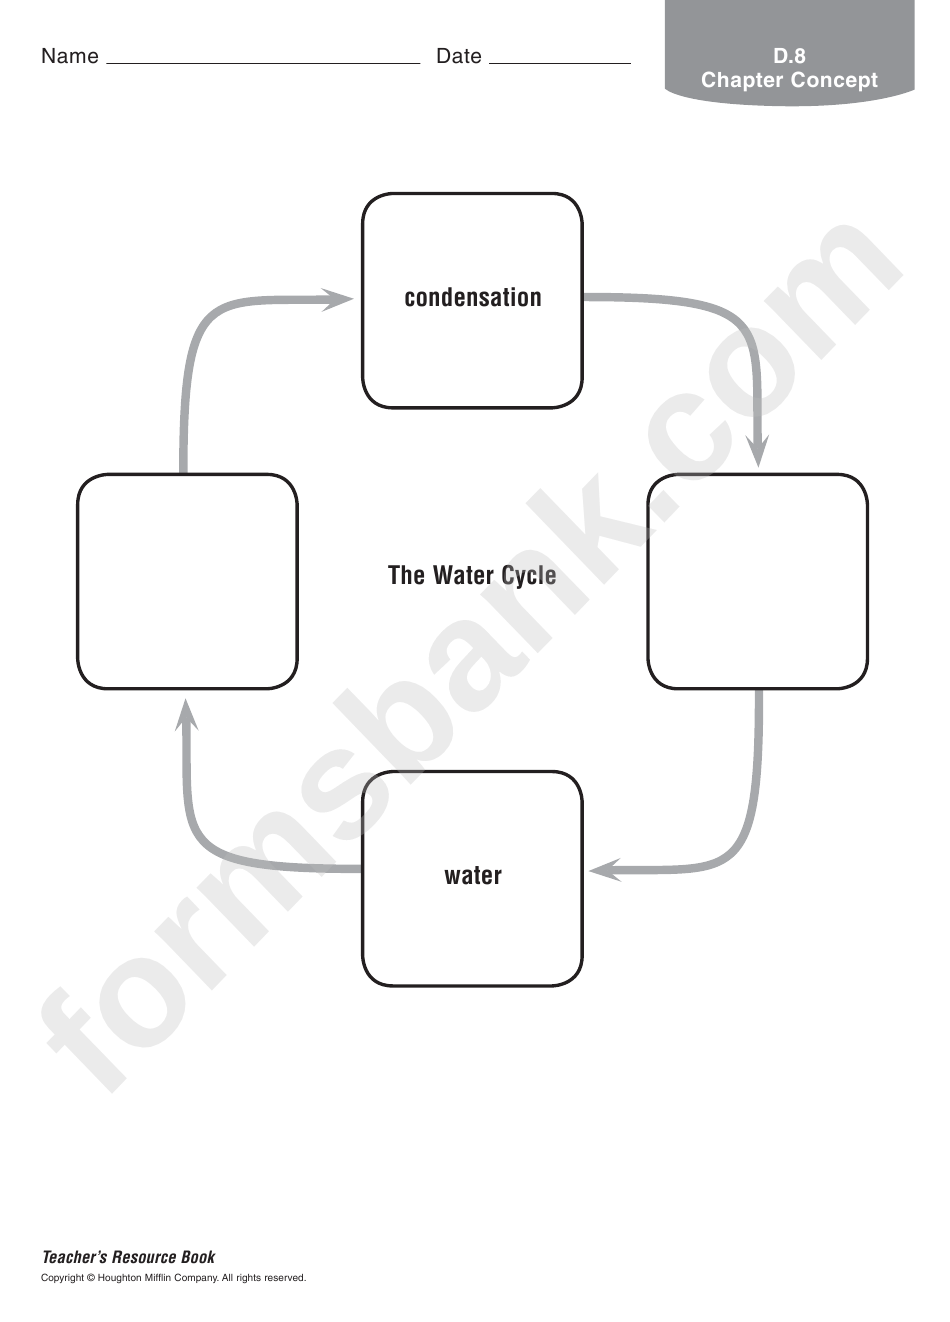 The Water Cycle Geography Worksheet printable pdf download Regarding Water Cycle Worksheet Pdf